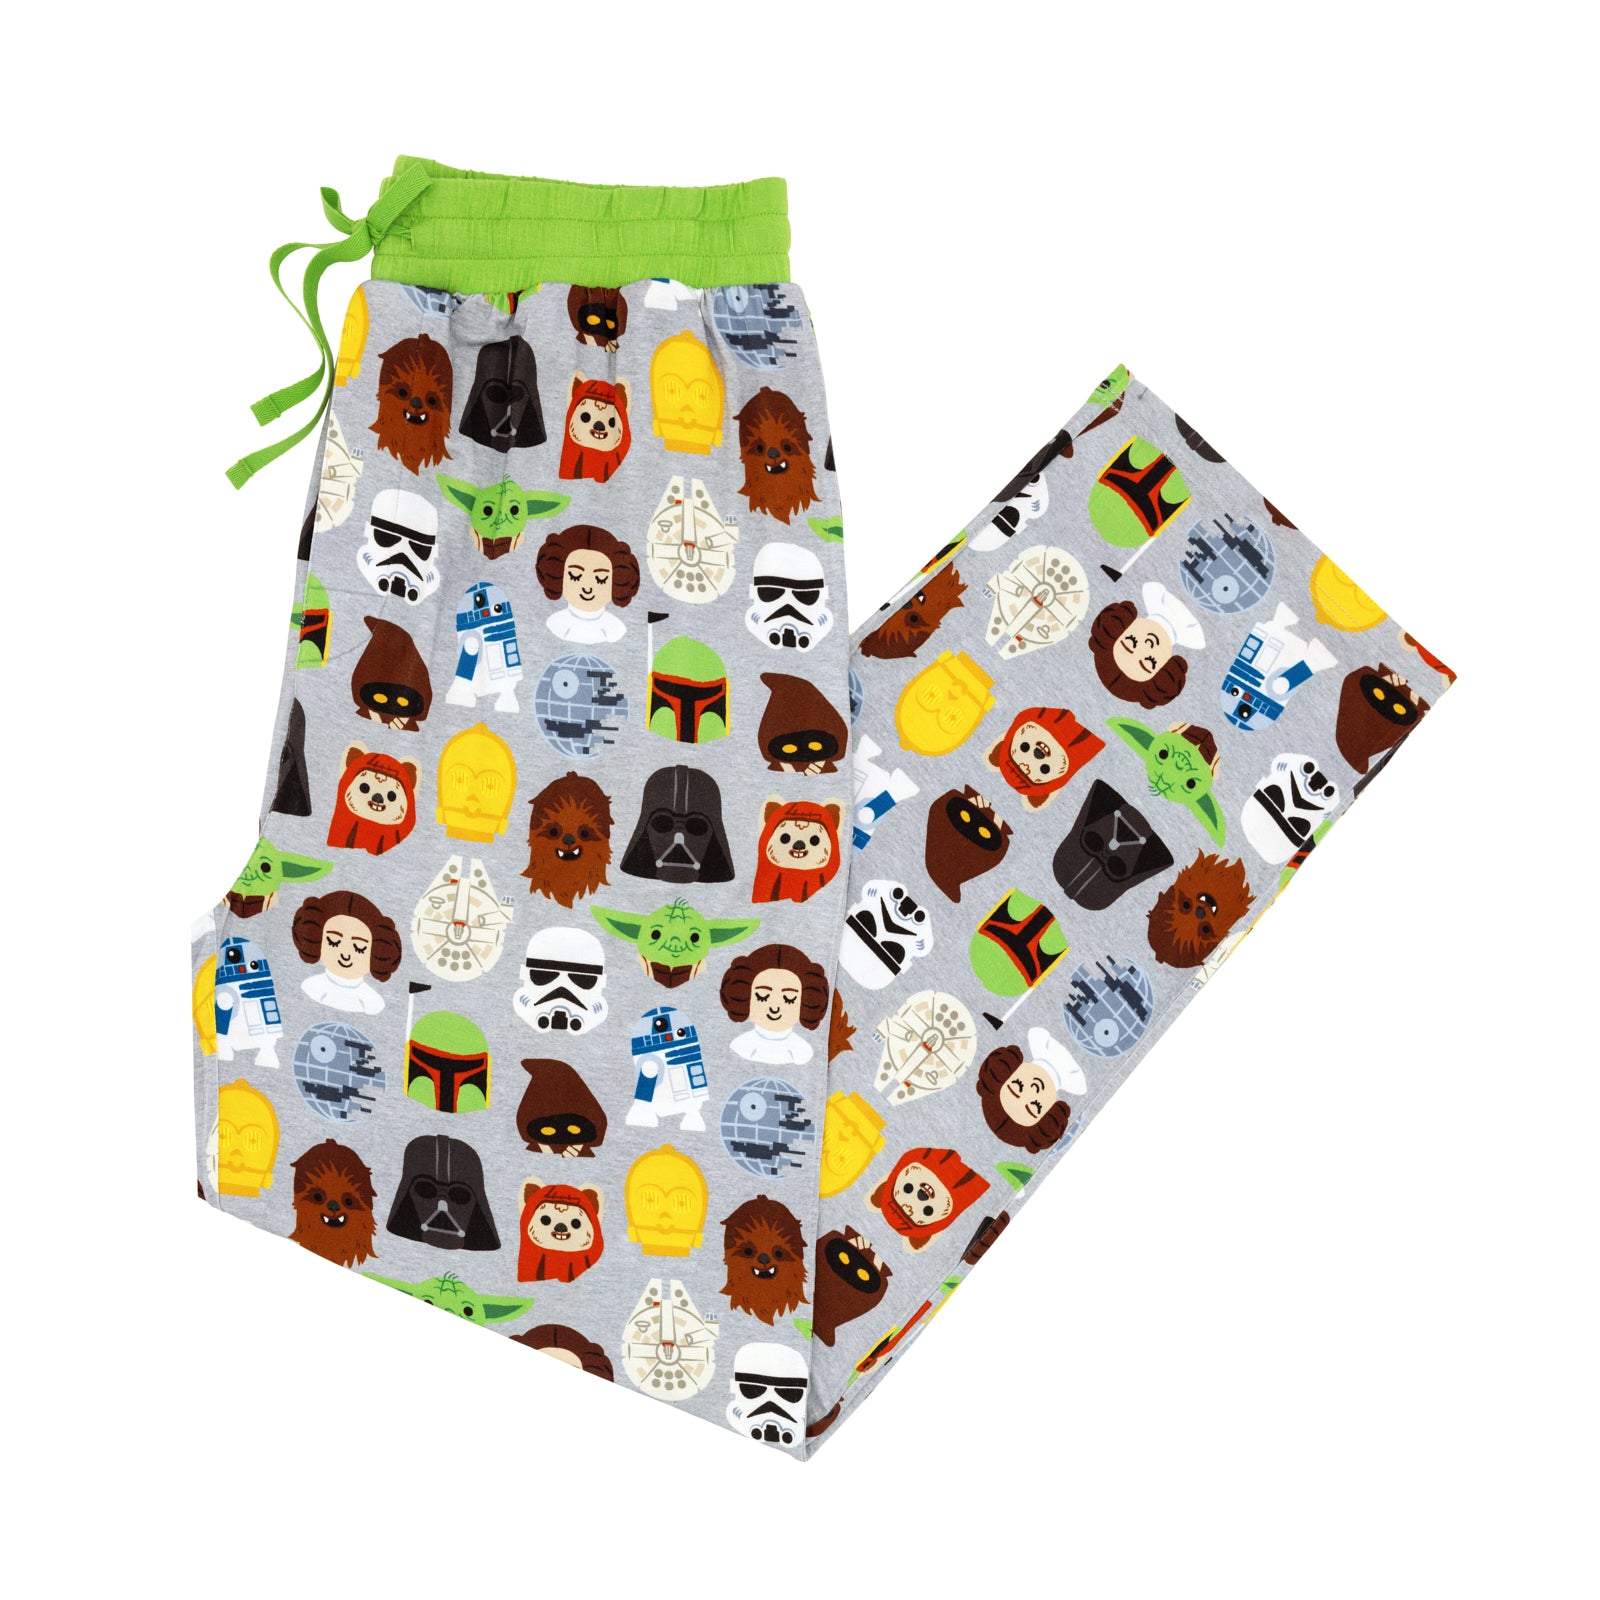 Flat lay image of Legends of the Galaxy men's pajama pants